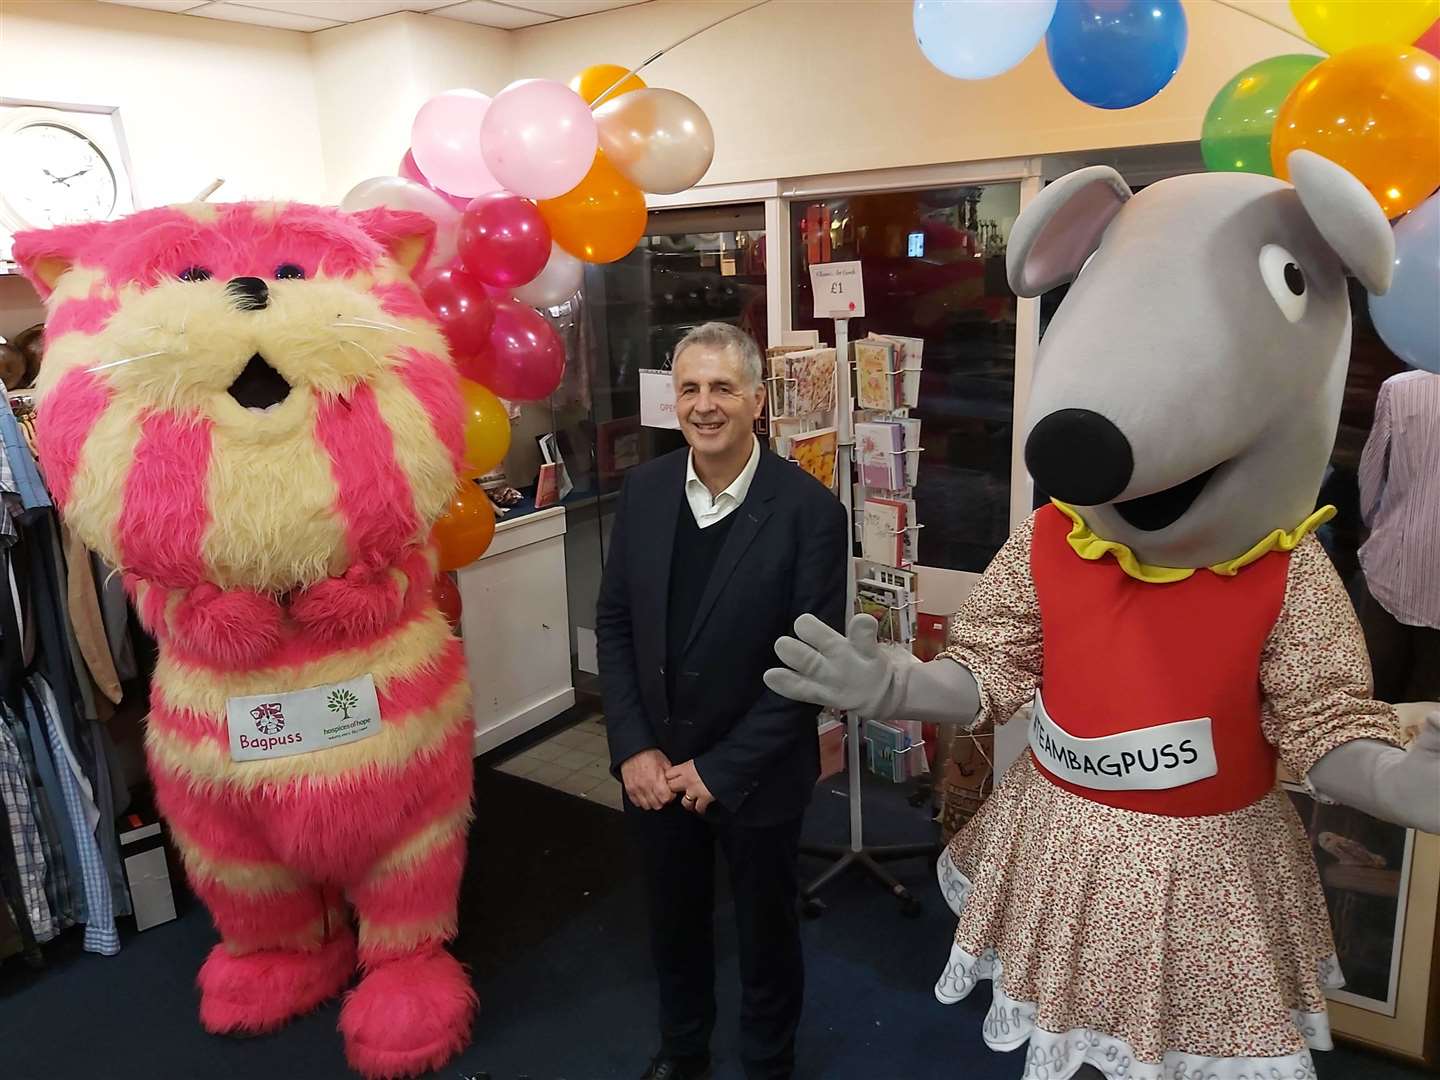 Charity founder Graham Perolls with Bagpuss and Lizzy